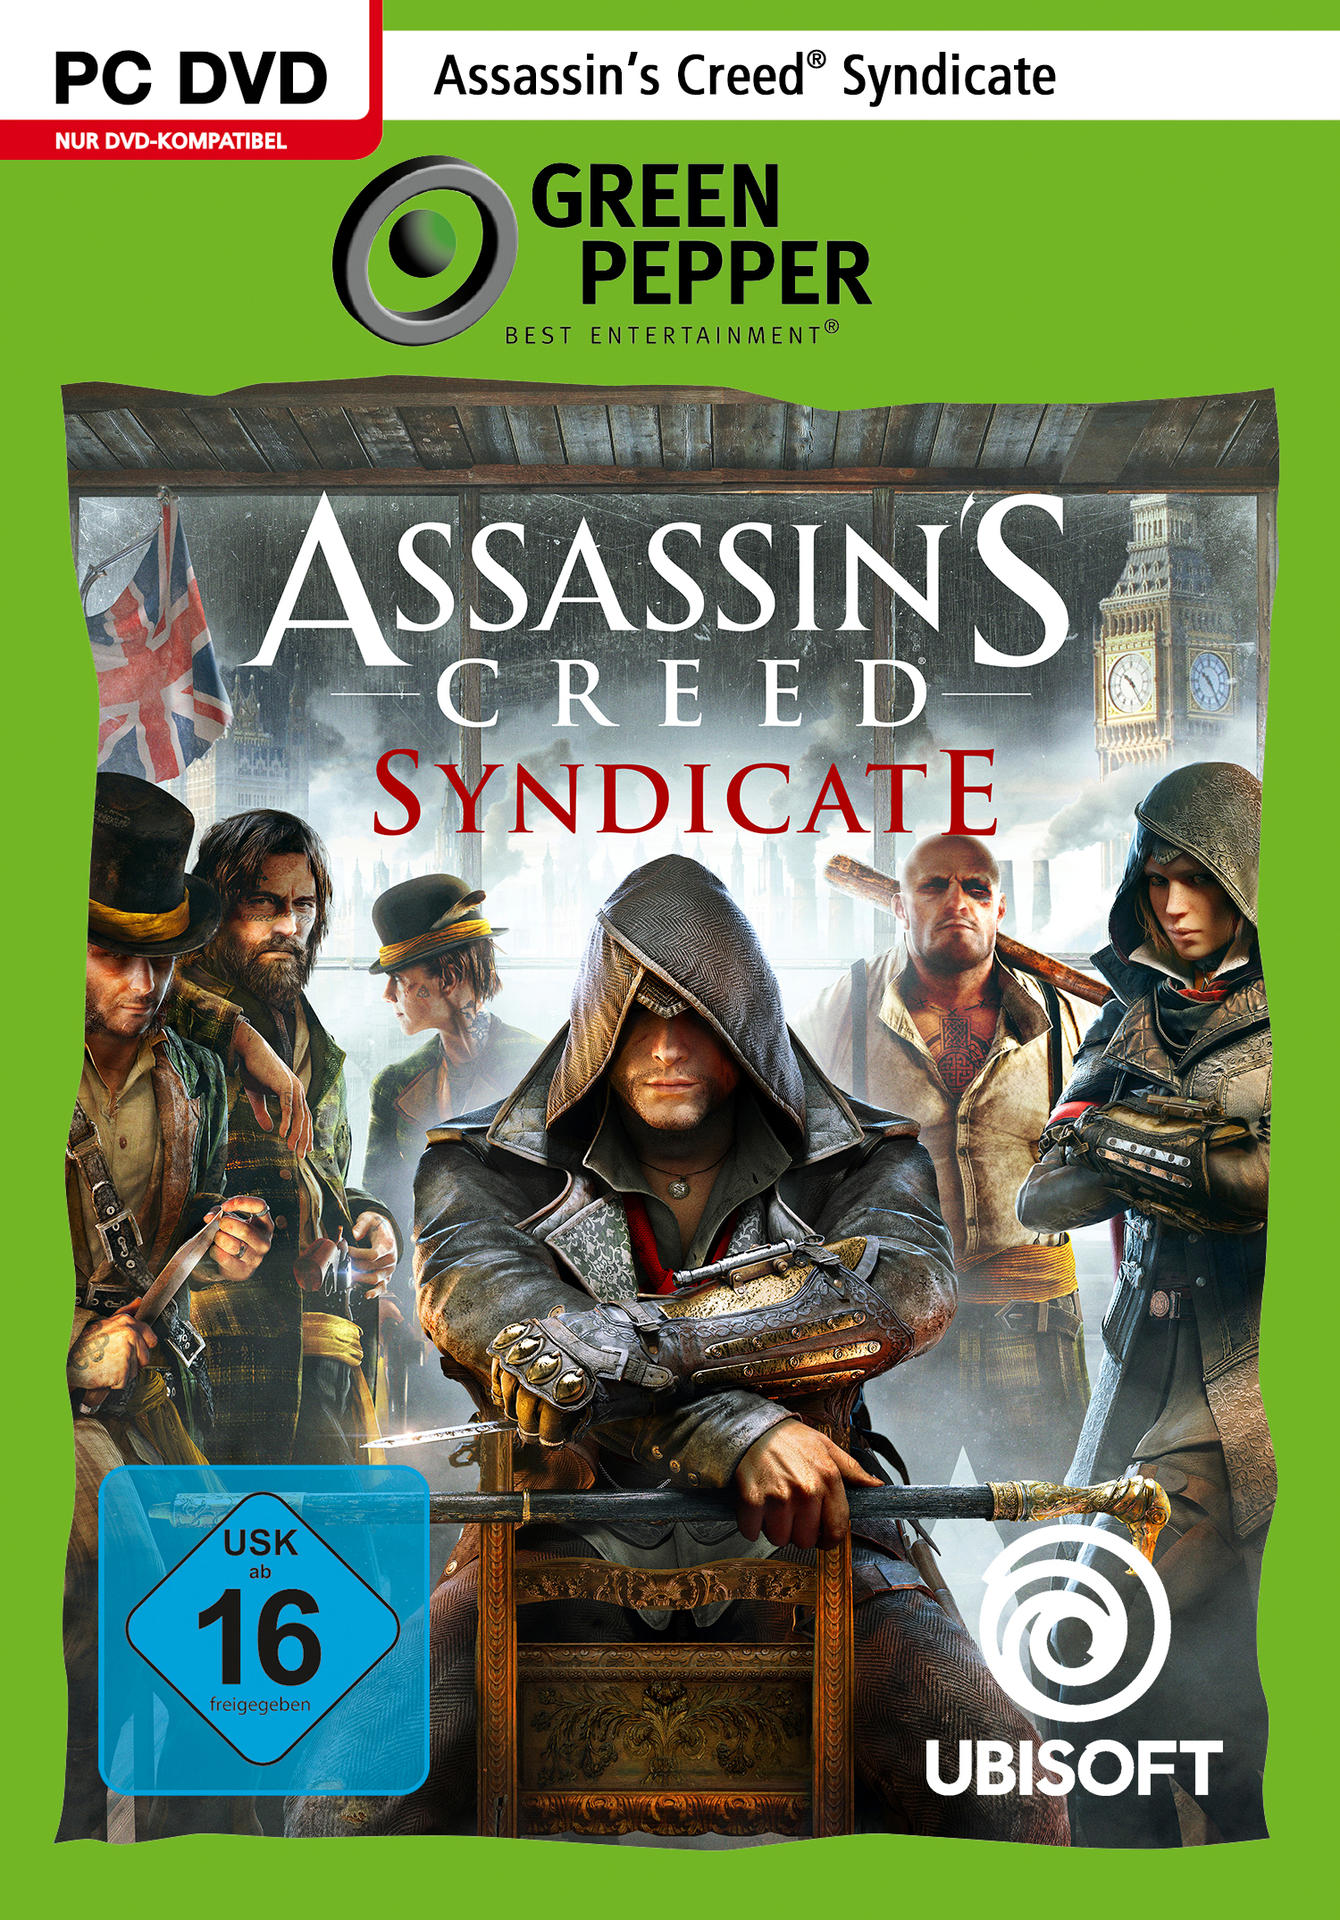 Assassins Creed [PC] - Syndicate